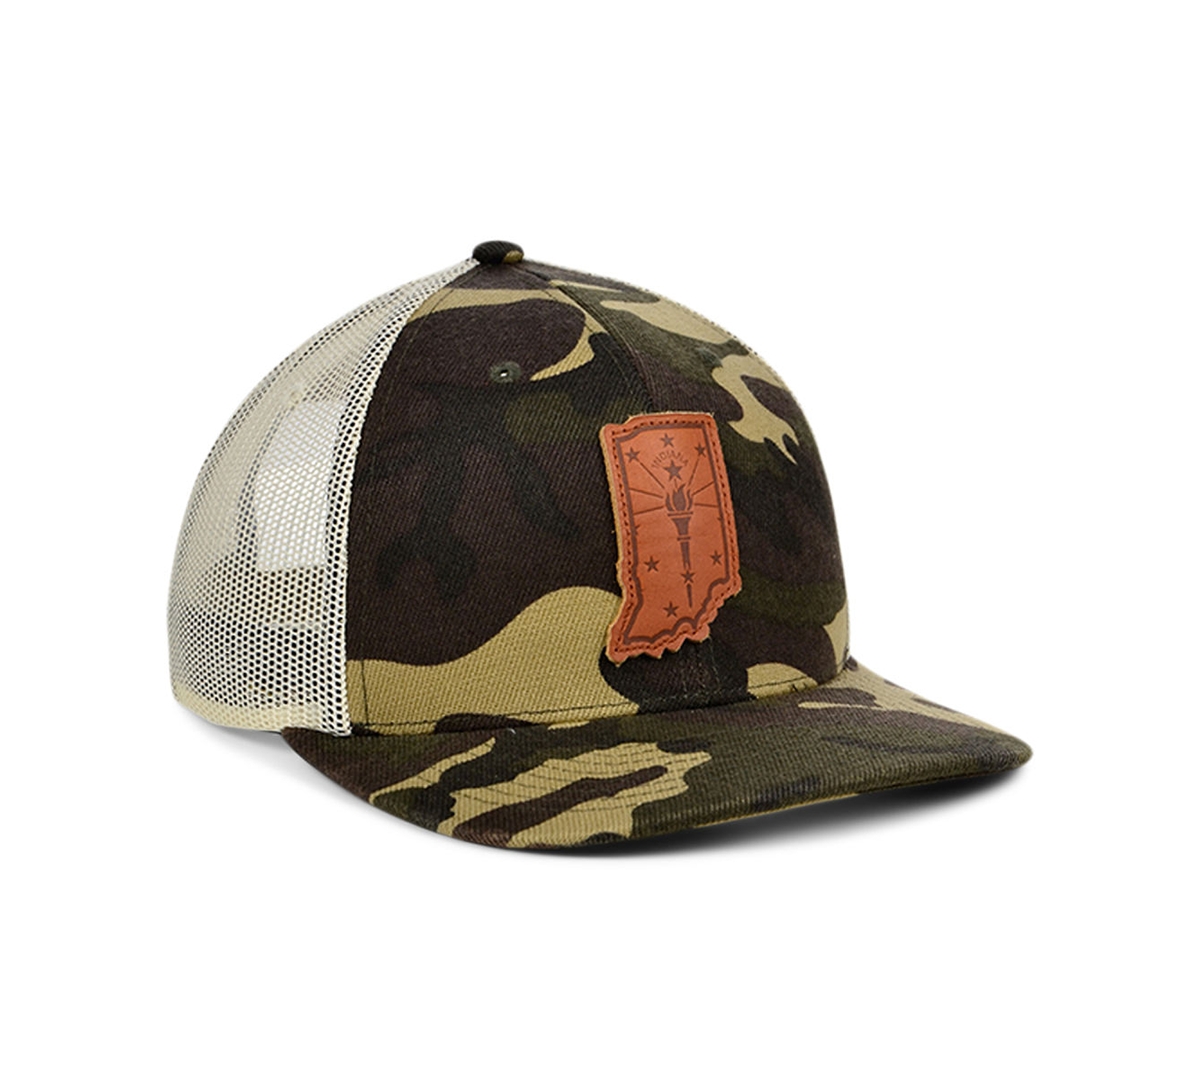 Shop Lids Local Crowns Indiana Woodland State Patch Curved Trucker Cap In Woodlandcamo,ivory,brown